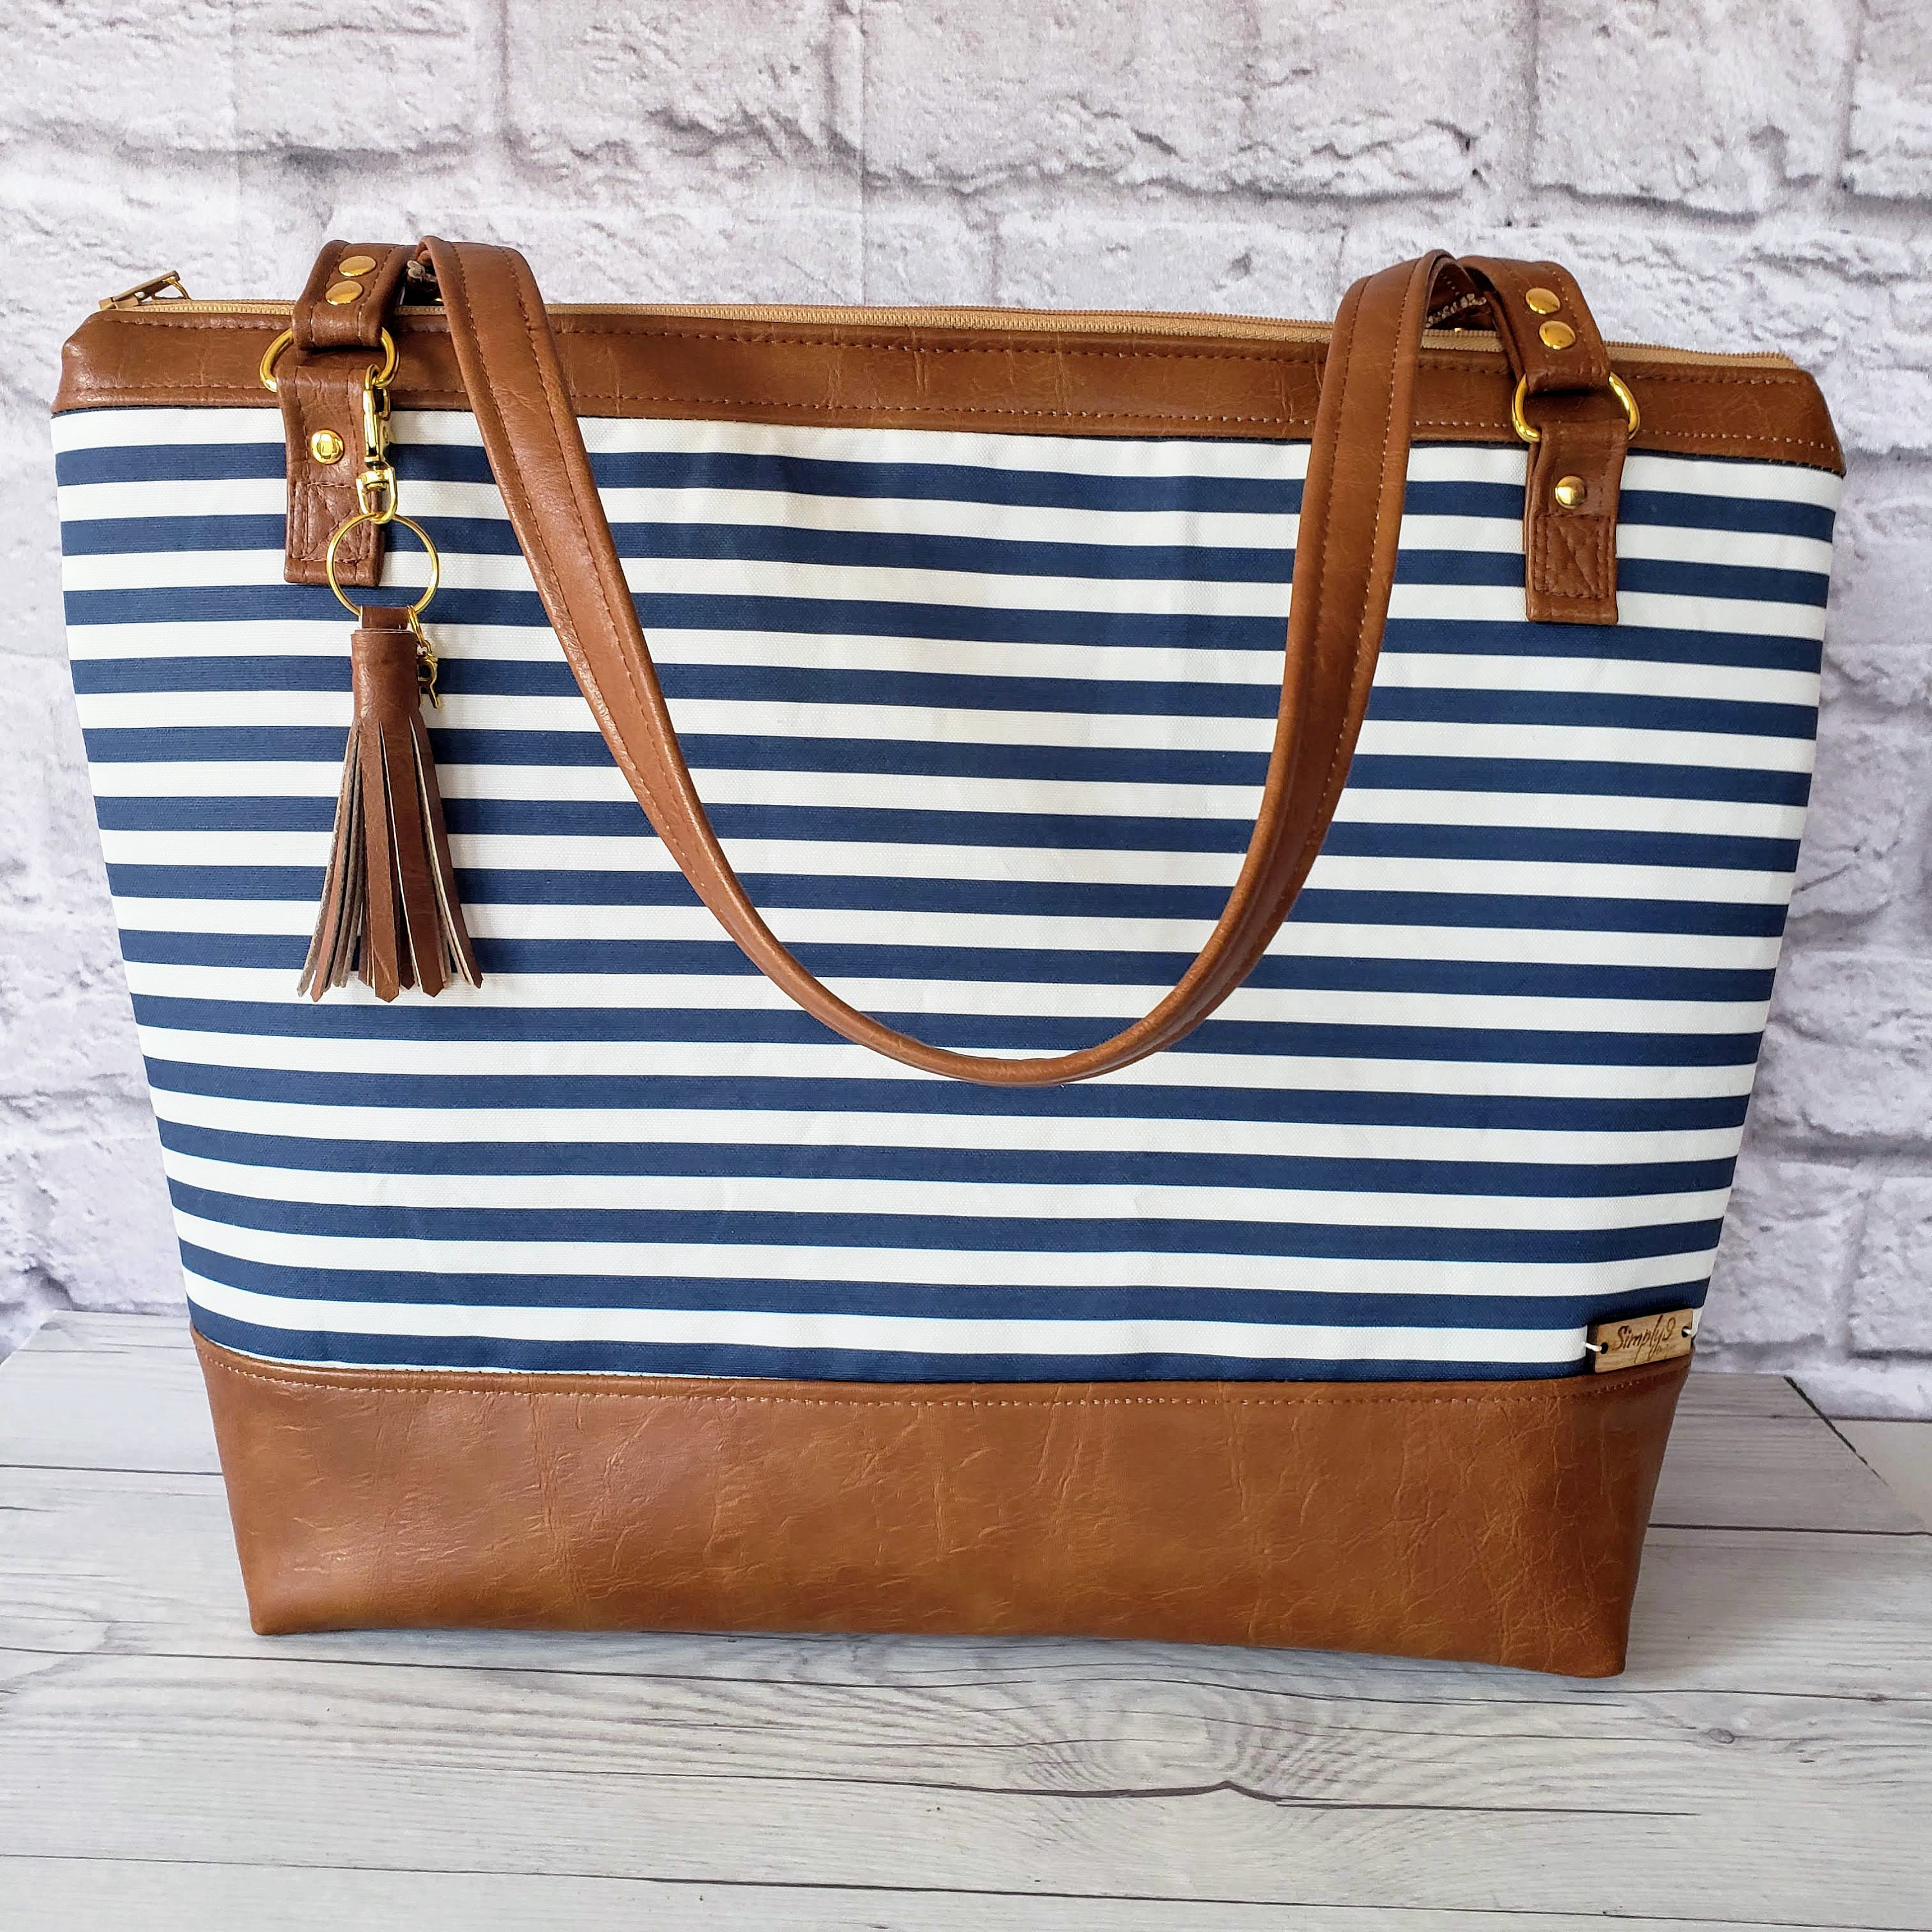 Monogrammed Tote Bags For Professional Women | IQS Executive